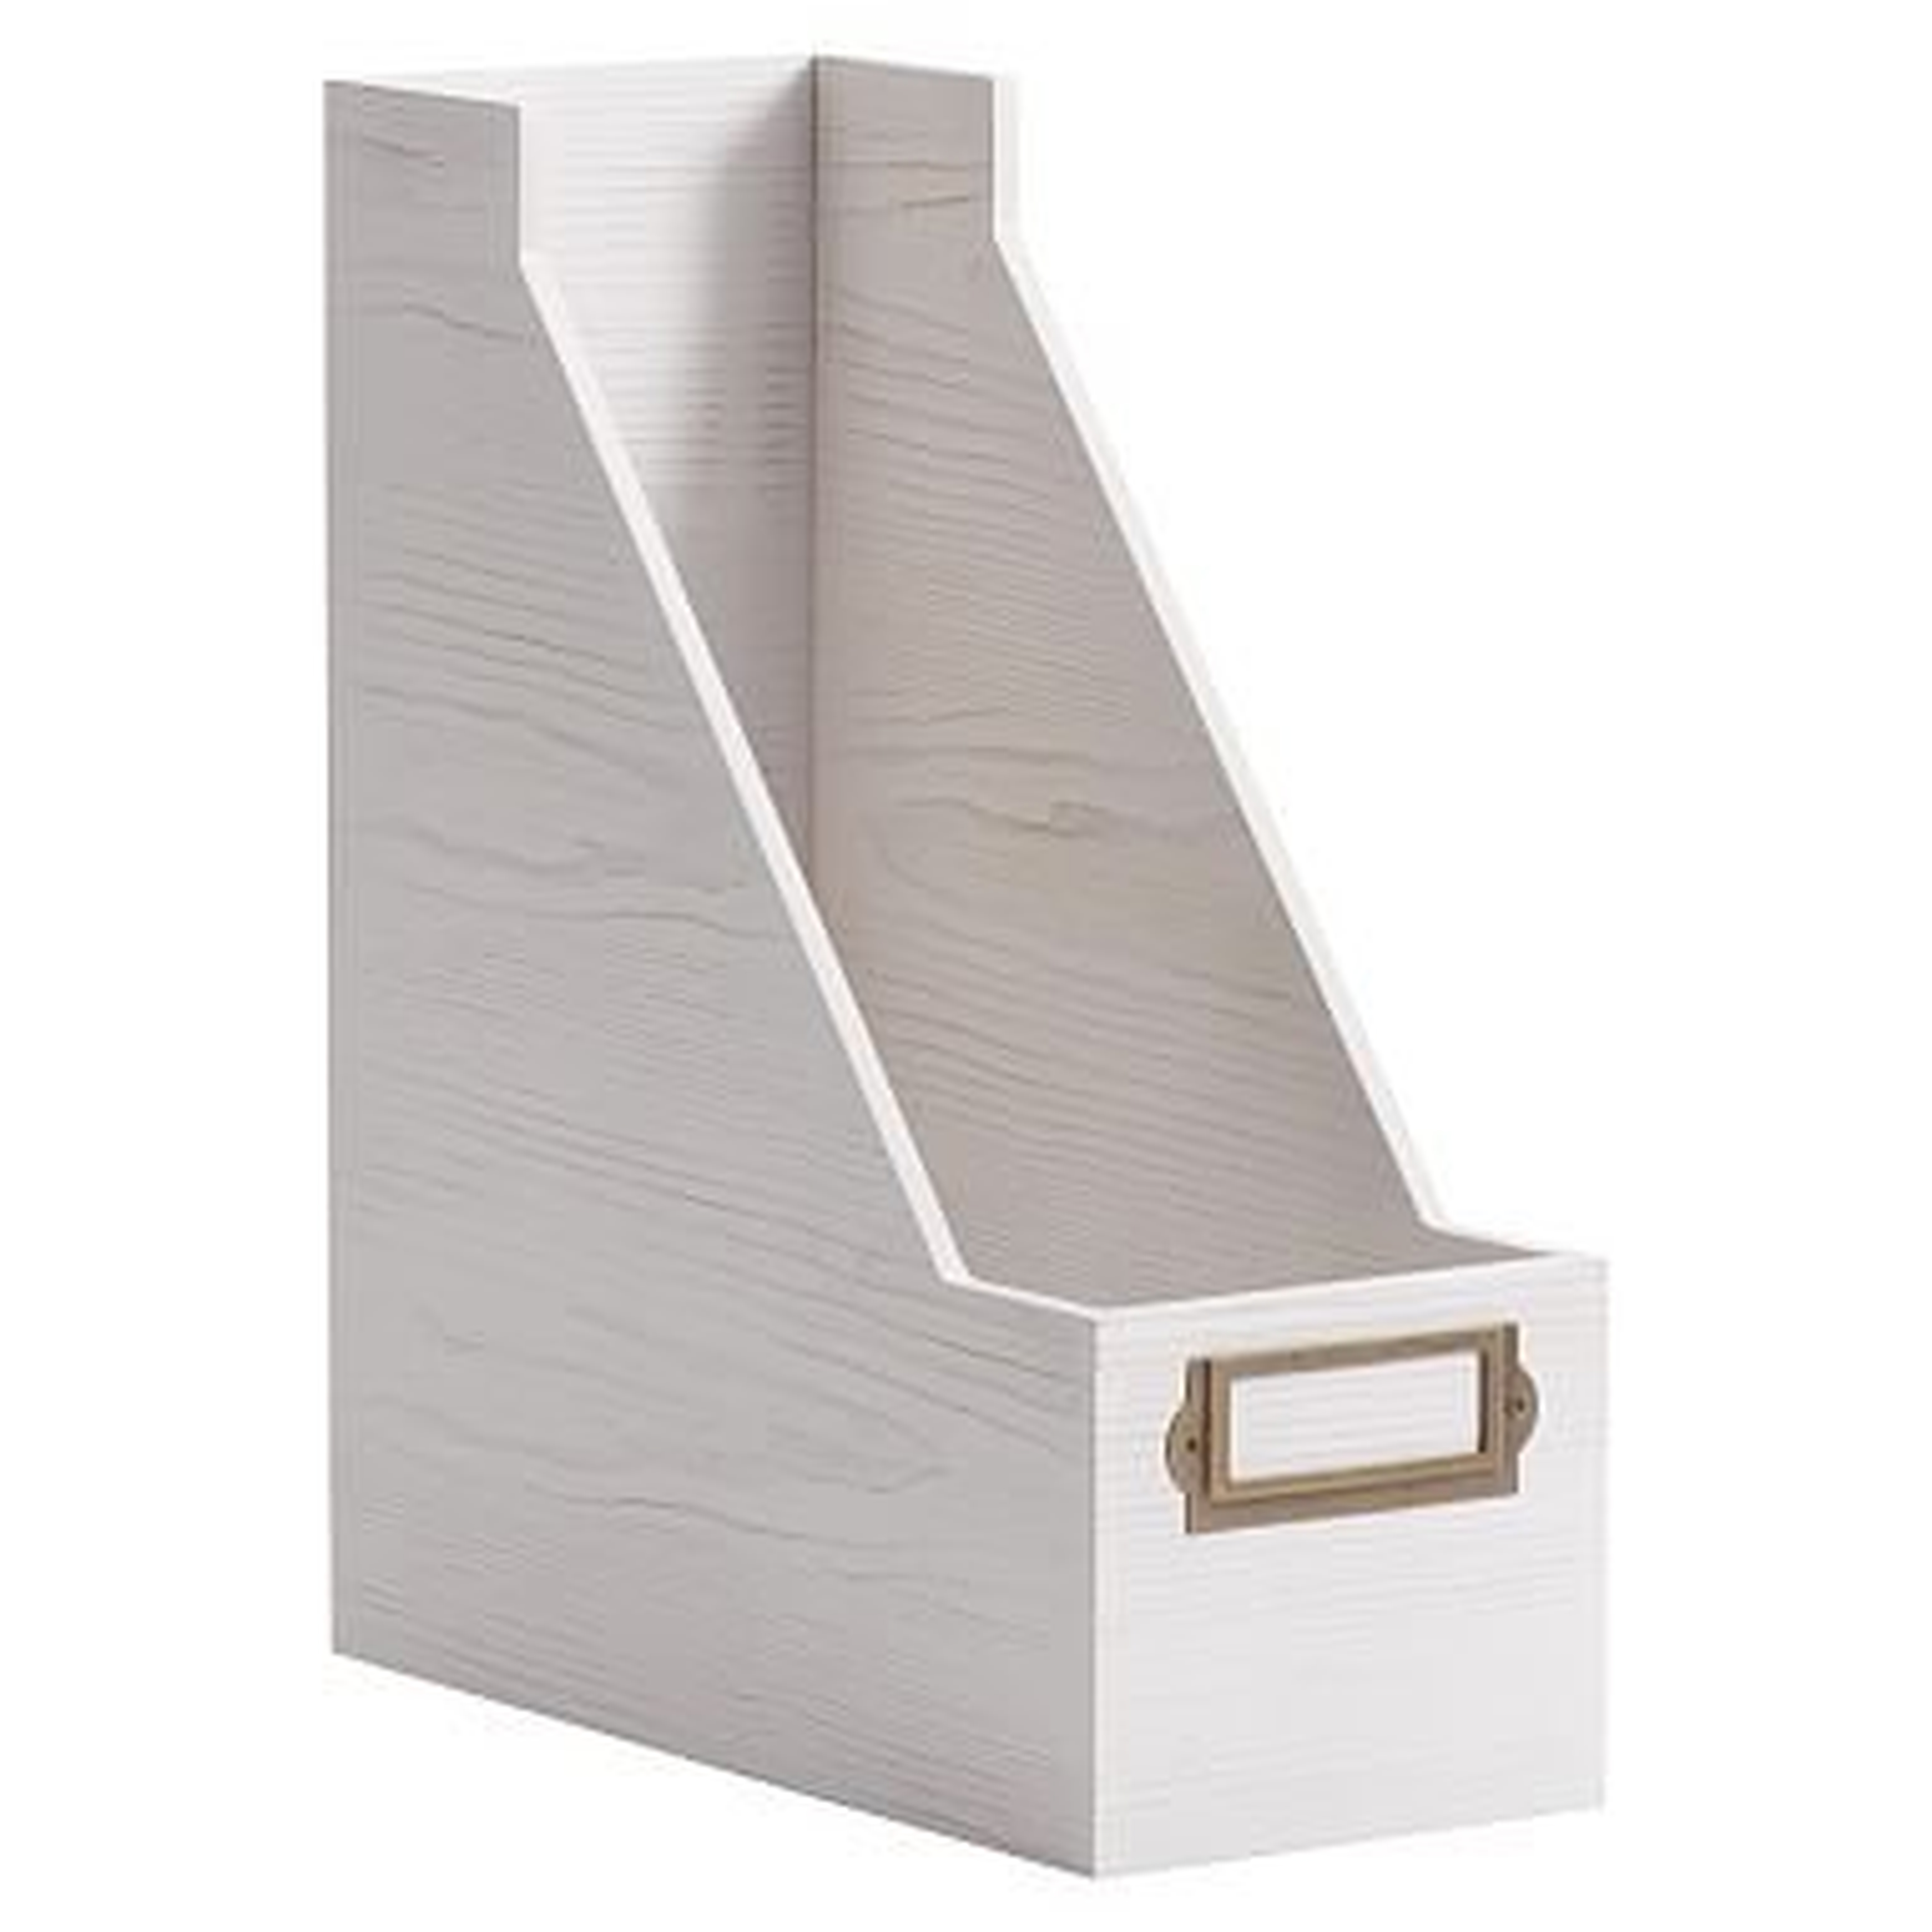 Classic Wooden Desk Accessories, Magazine Caddy, White Wash - Pottery Barn Teen